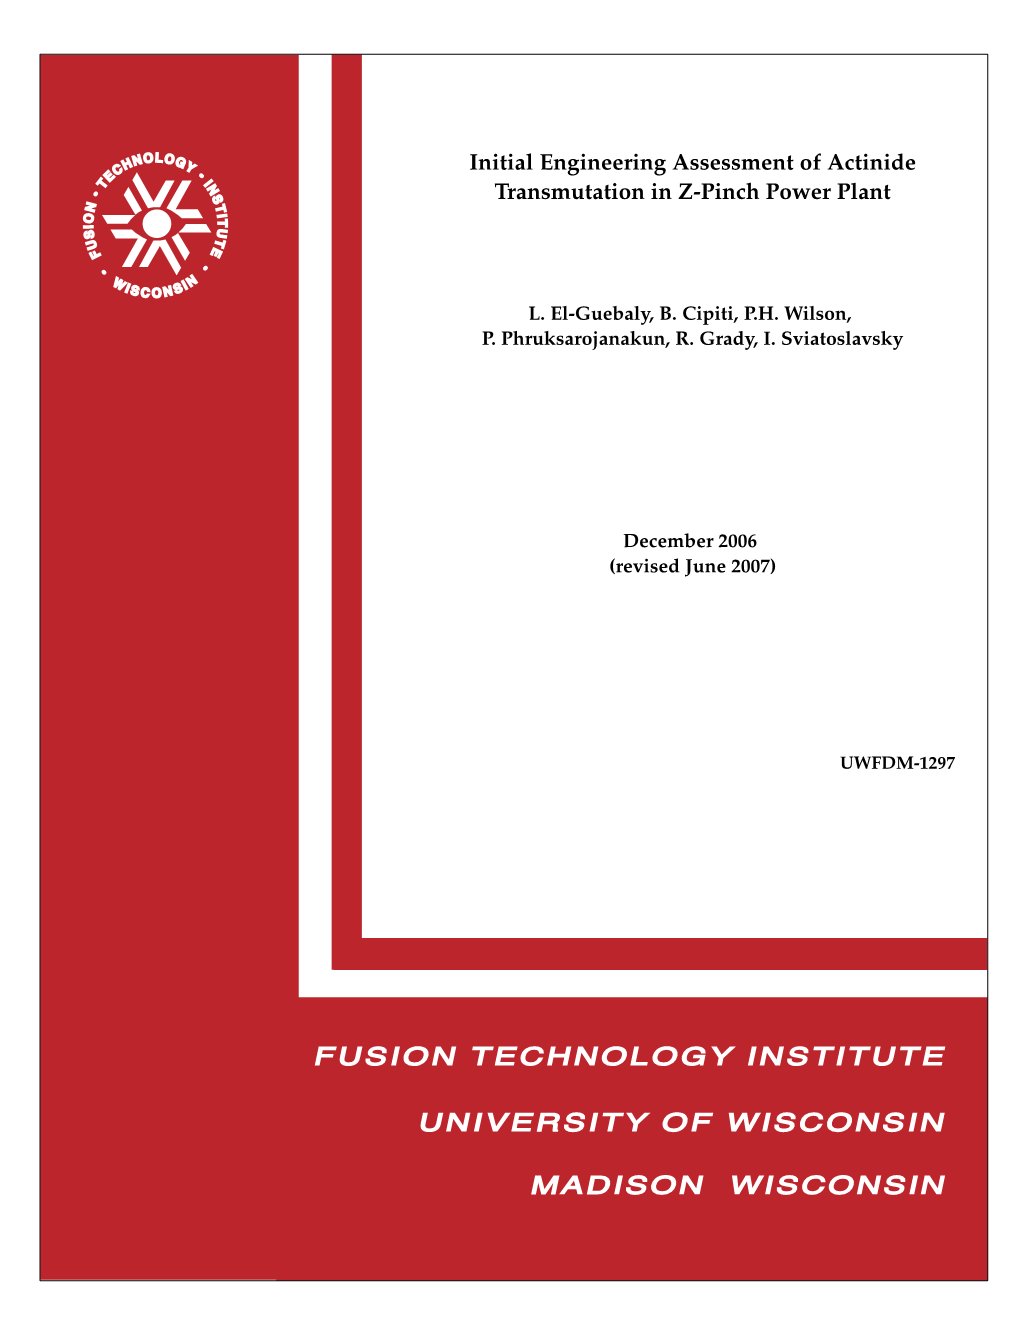 UWFDM-1297 Initial Engineering Assessment of Actinide Transmutation in Z-Pinch Power Plant